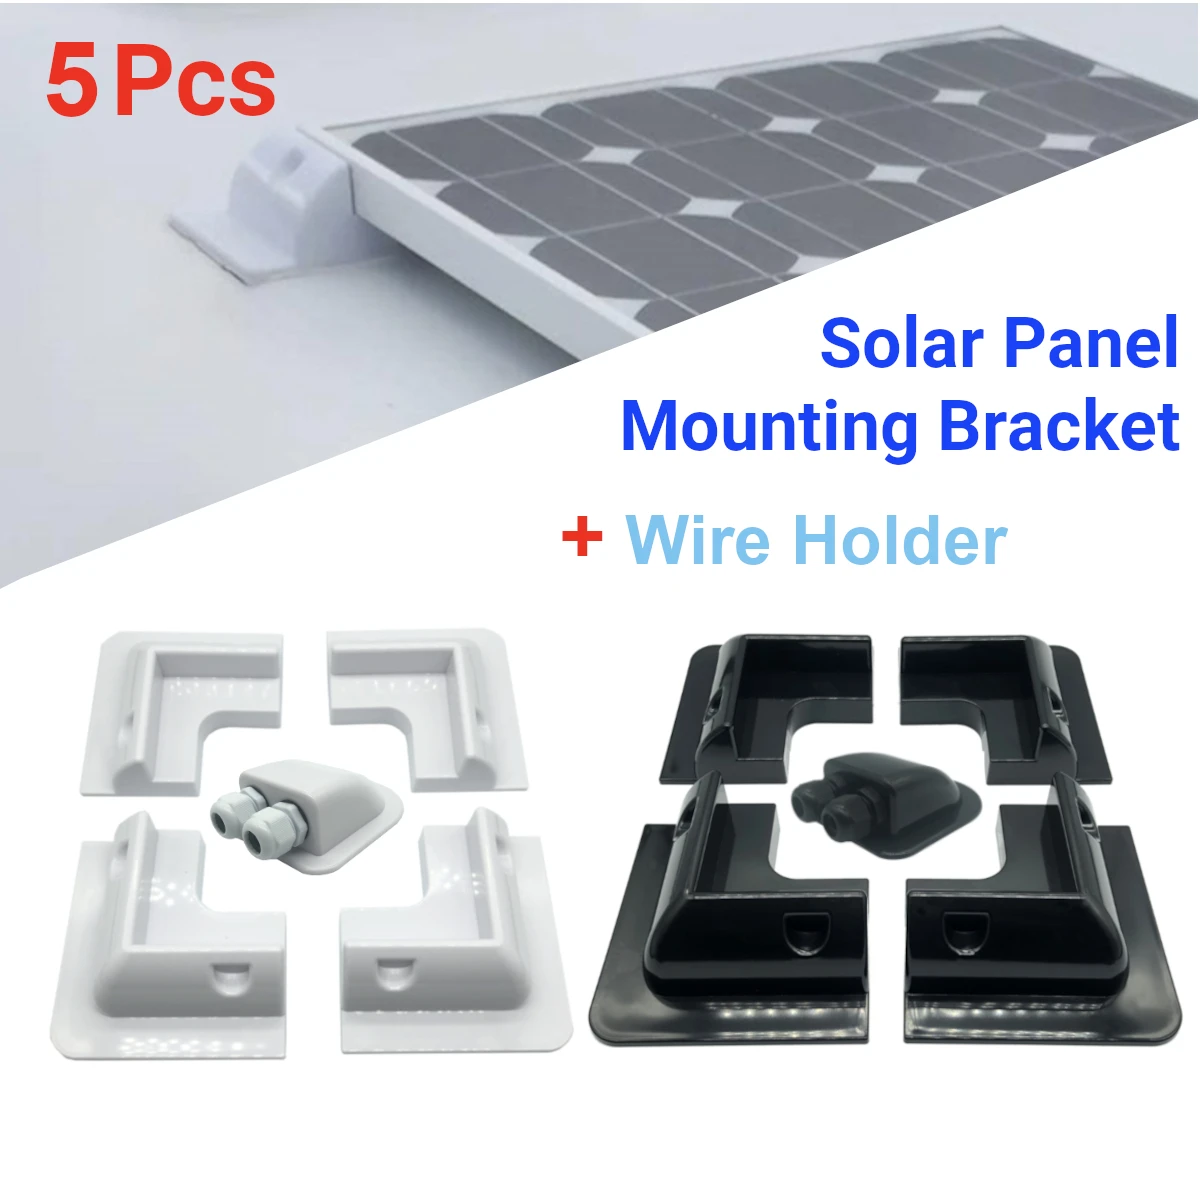 5x RV Top Roof Solar Panel Mounting Fixing Bracket Kit Wire Box ABS Supporting Holder for Caravans Camper Boat Yacht Motorhome clip trim mtg for hyundai genesis g80 gv70 staria azera tucson nx4 sportage carens roof panel fixing clip 85459g8000 85459 g8000